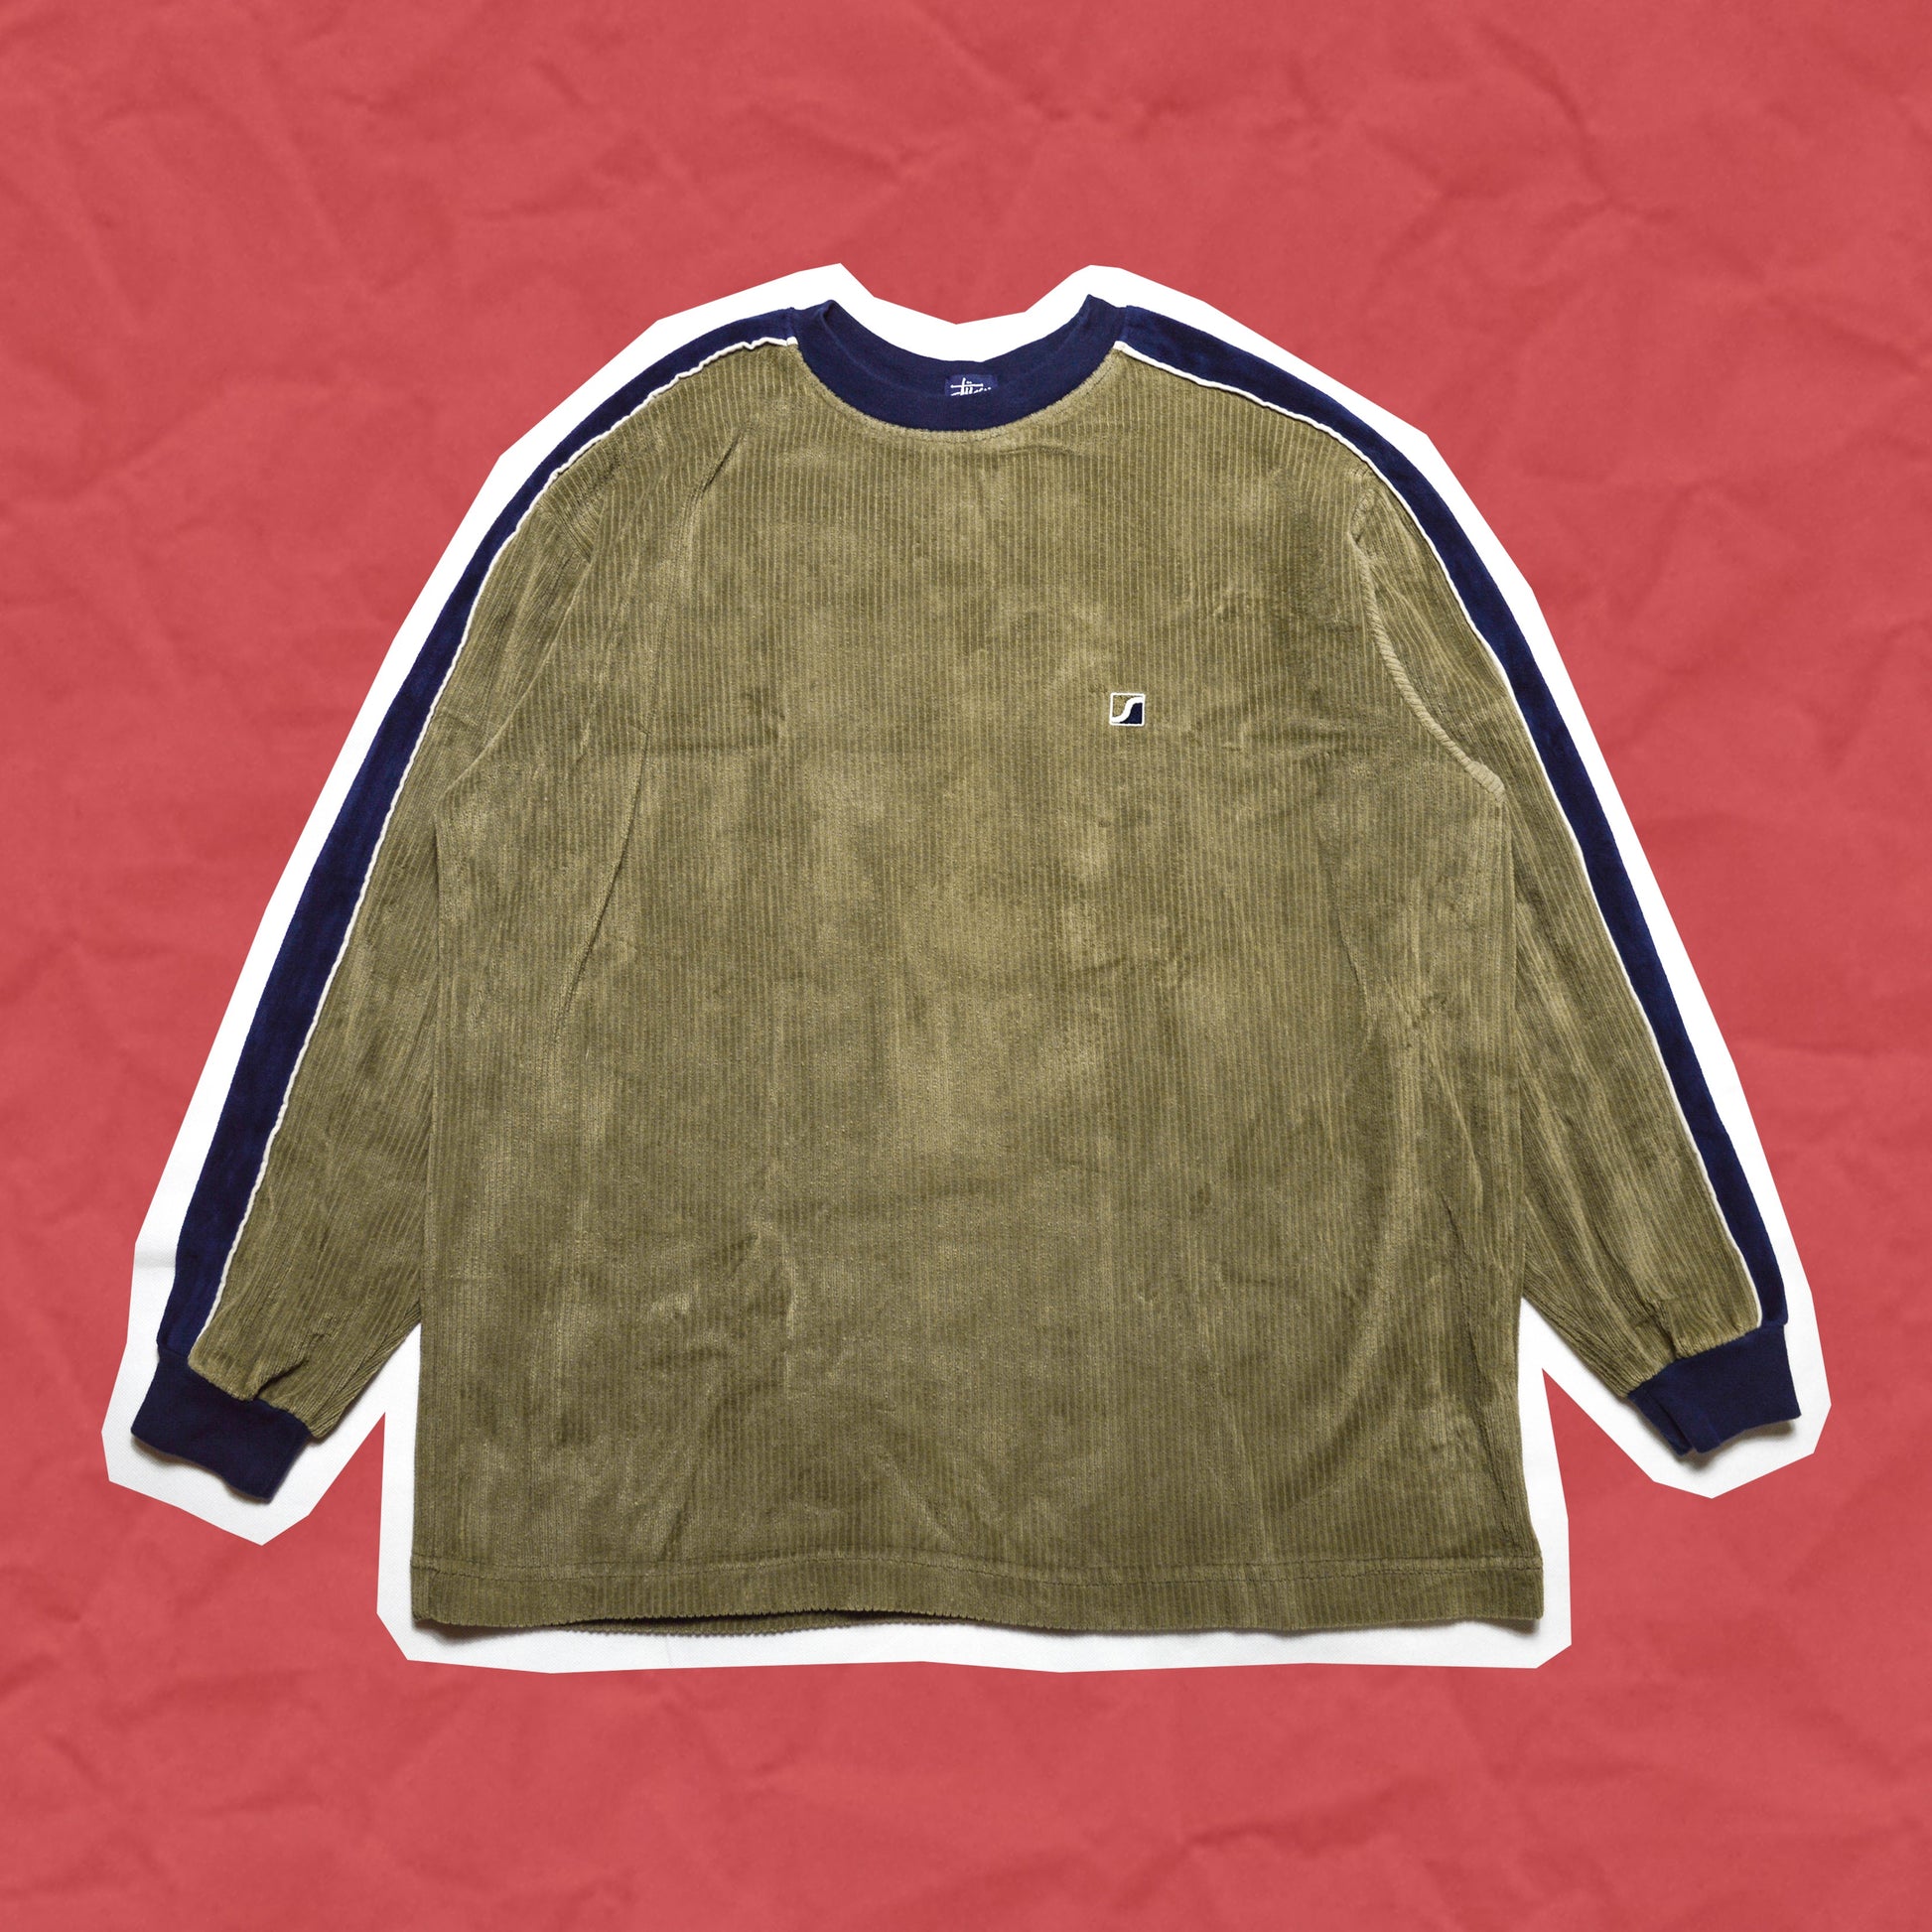 Stussy Ribbed Longsleeve Top / T-shirt with Velour Sleeve Panels (M~L)